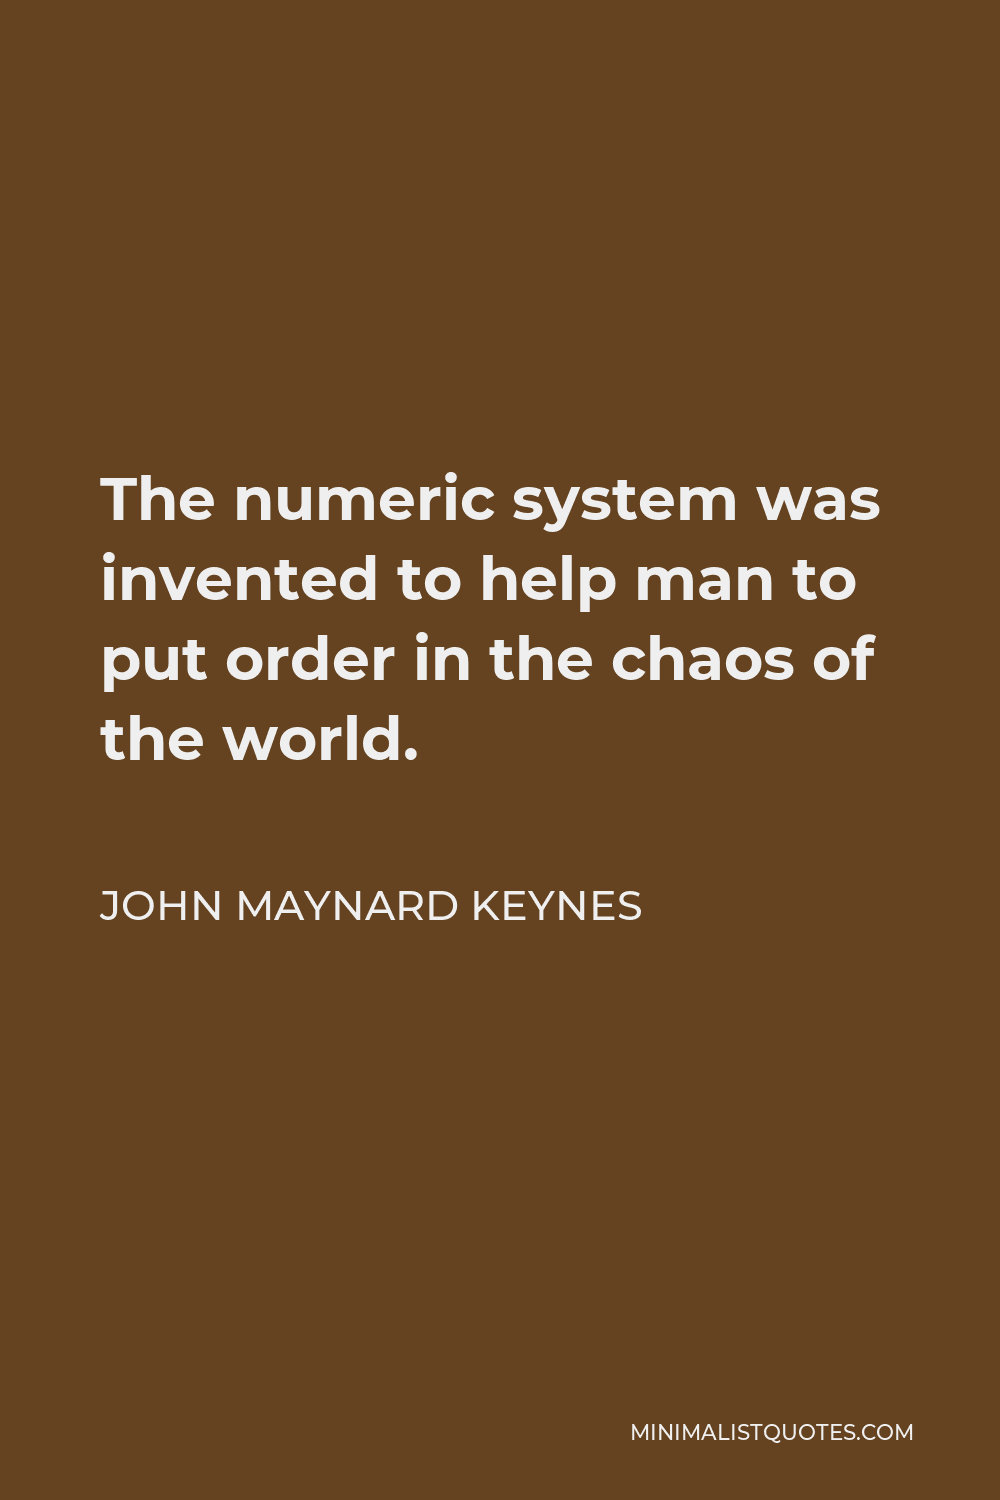 John Maynard Keynes Quote - The numeric system was invented to help man to put order in the chaos of the world.